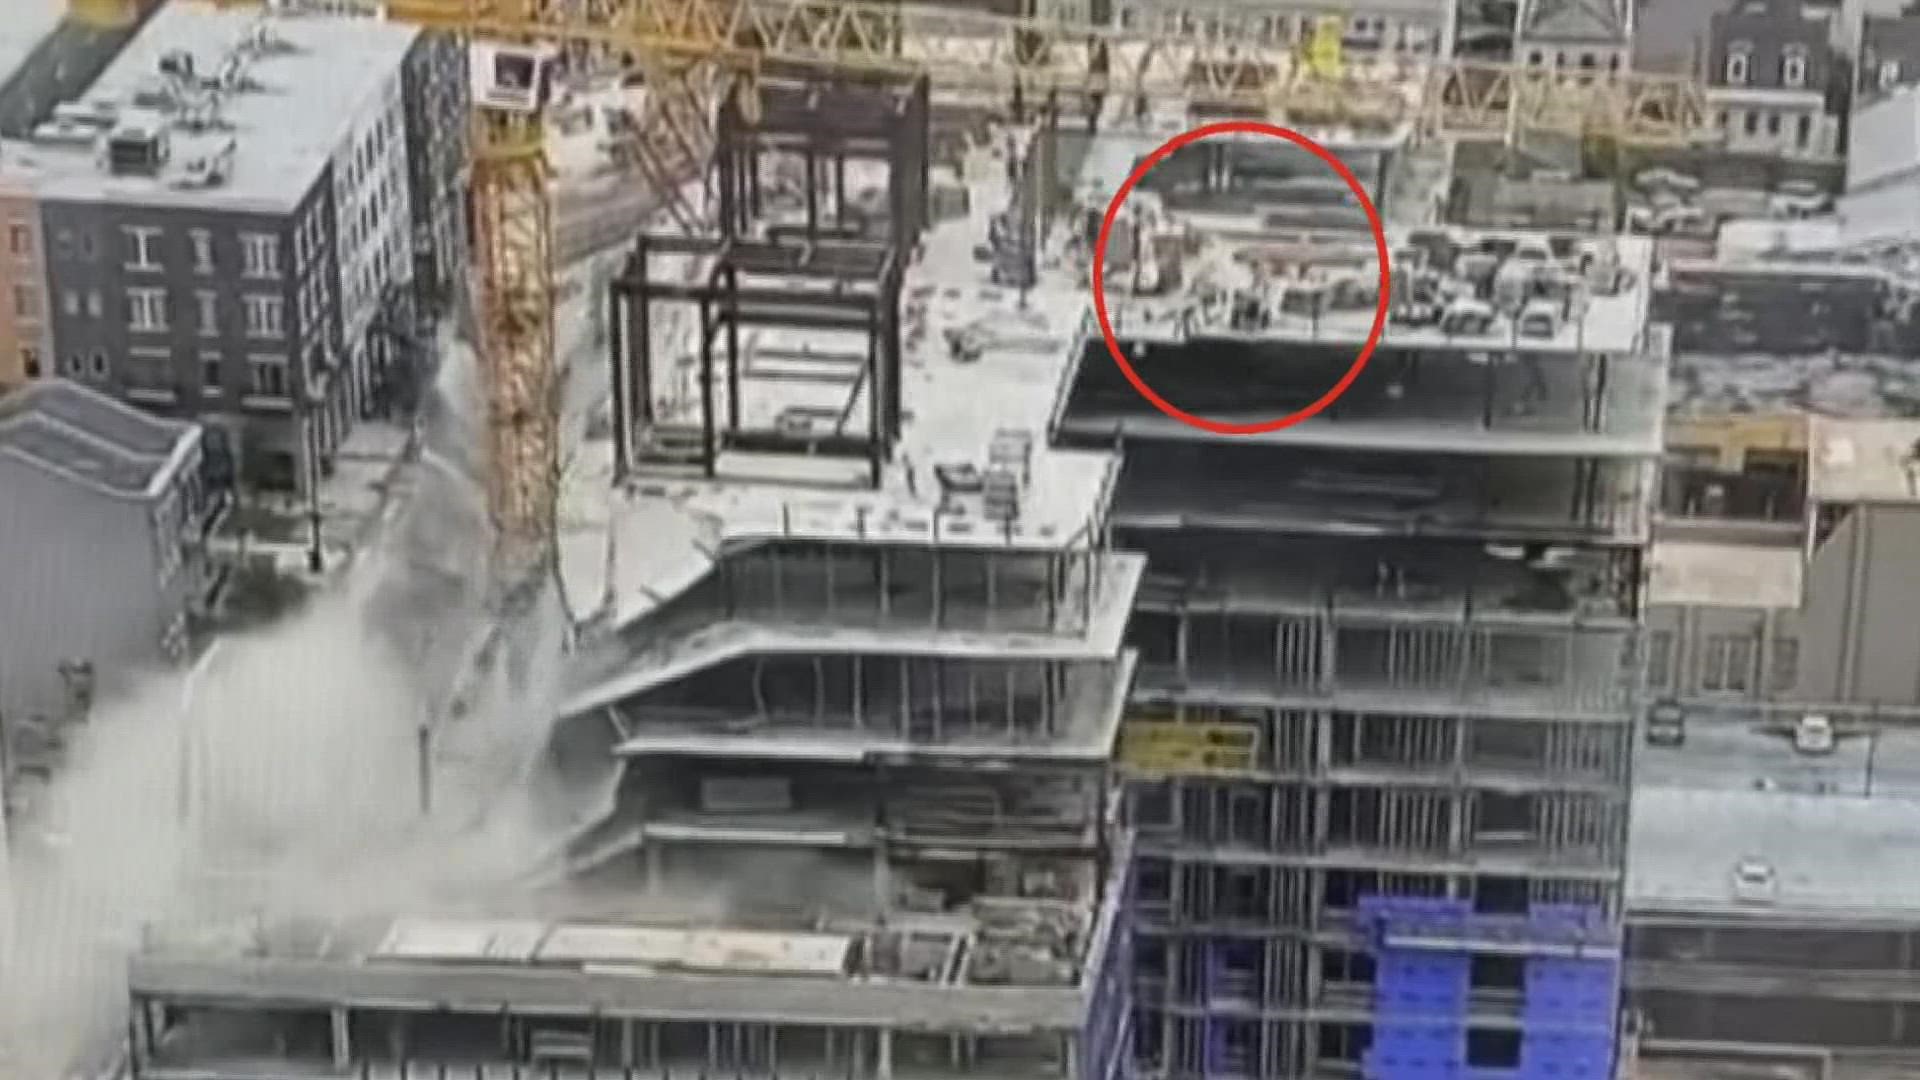 Exclusive video from WWLTV shows a new angle of the collapse that killed three workers and closed a part of North Rampart almost two years ago.